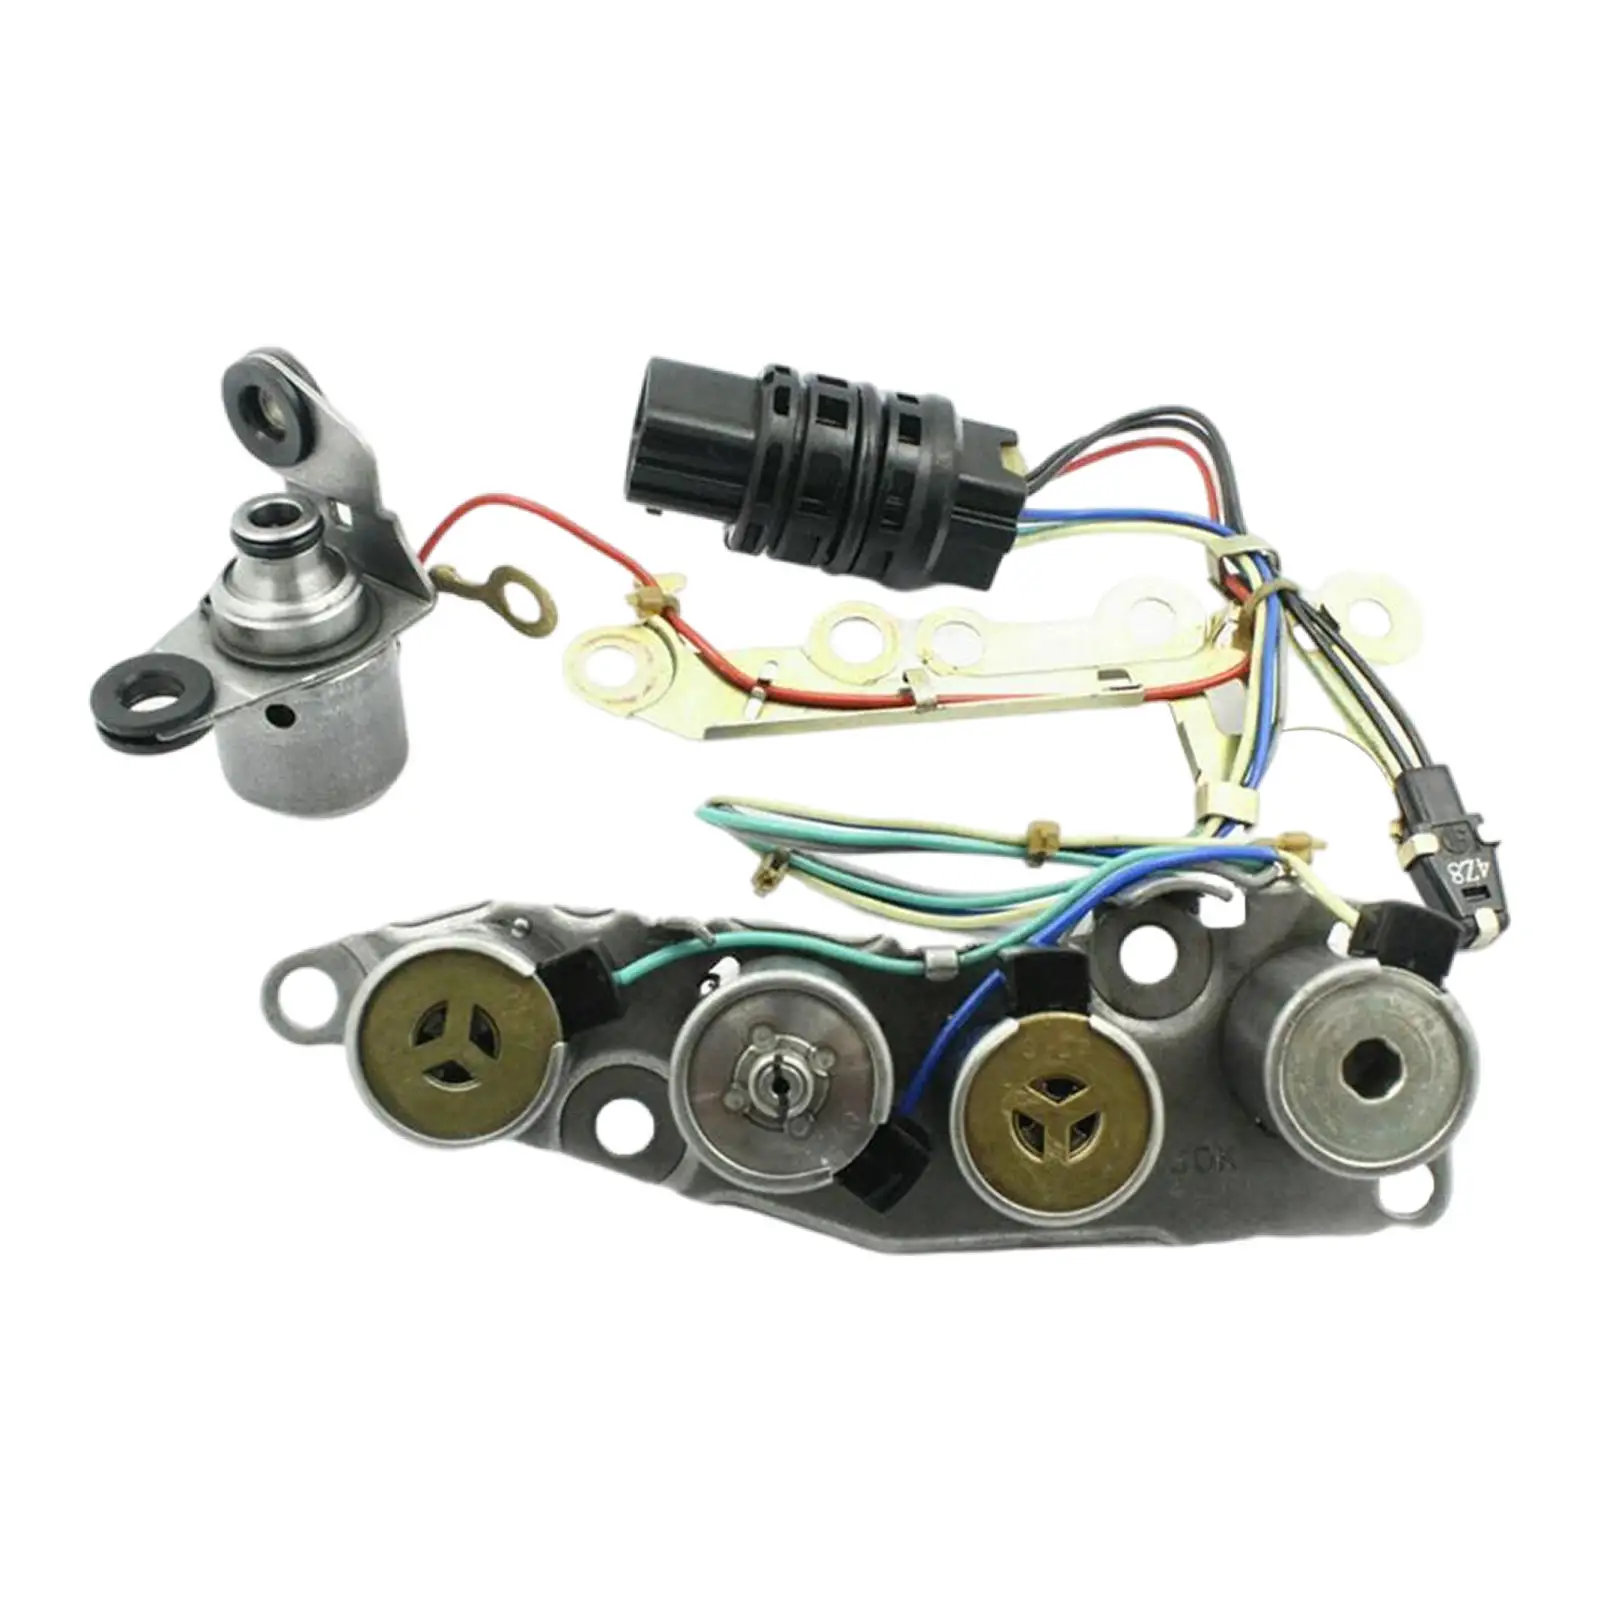 Transmission Solenoid Replacements Car Parts for i30 i35 Remanufactured Fit for Nissan for 31940-85x01